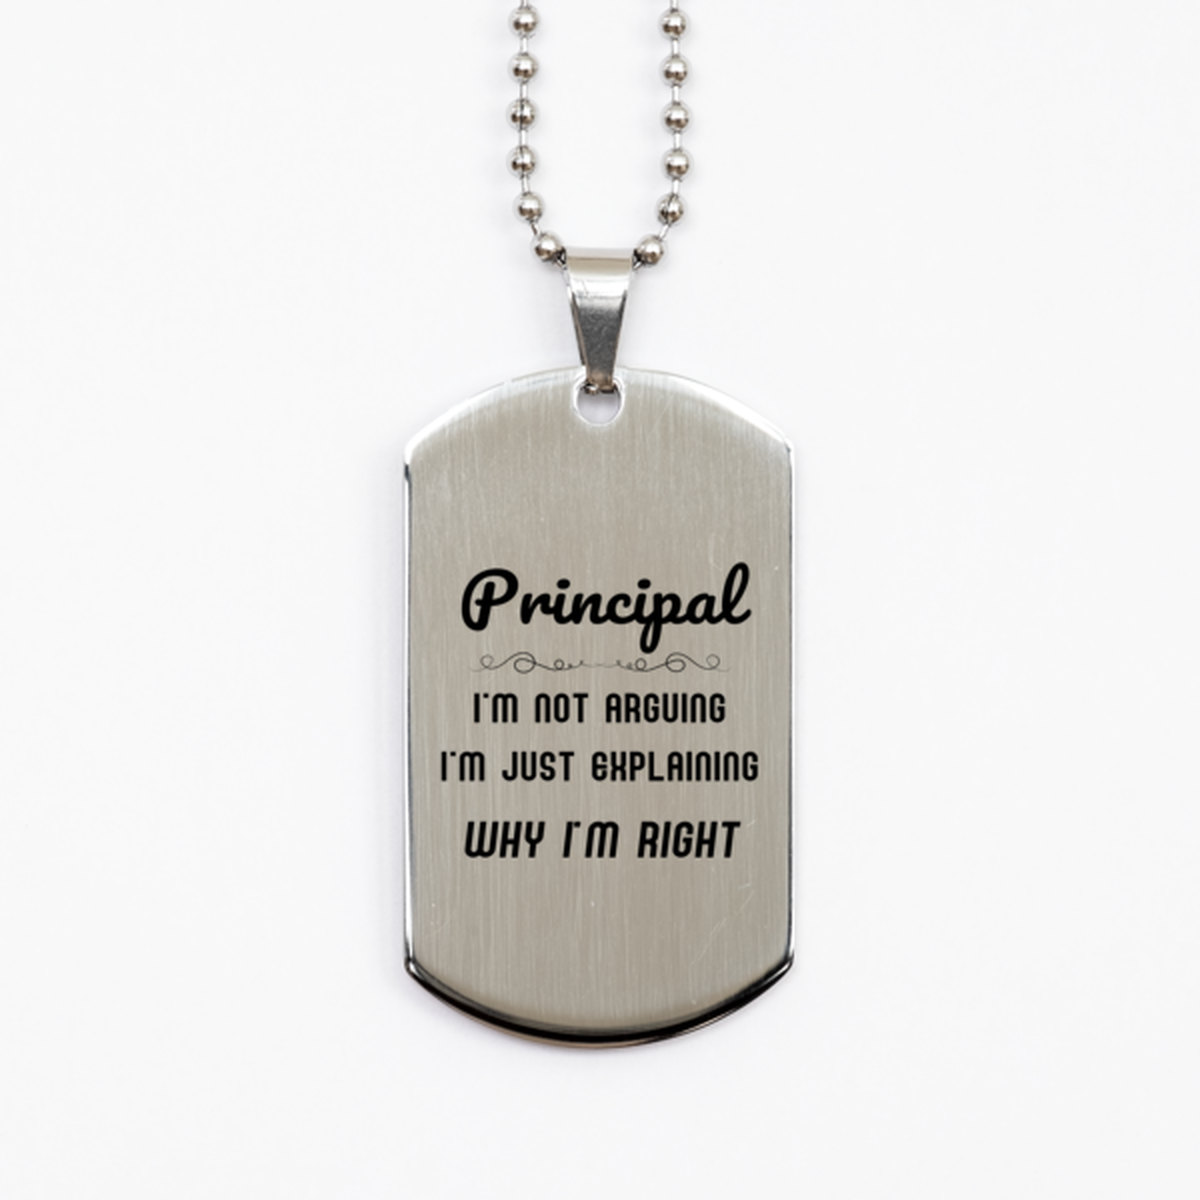 Principal I'm not Arguing. I'm Just Explaining Why I'm RIGHT Silver Dog Tag, Funny Saying Quote Principal Gifts For Principal Graduation Birthday Christmas Gifts for Men Women Coworker